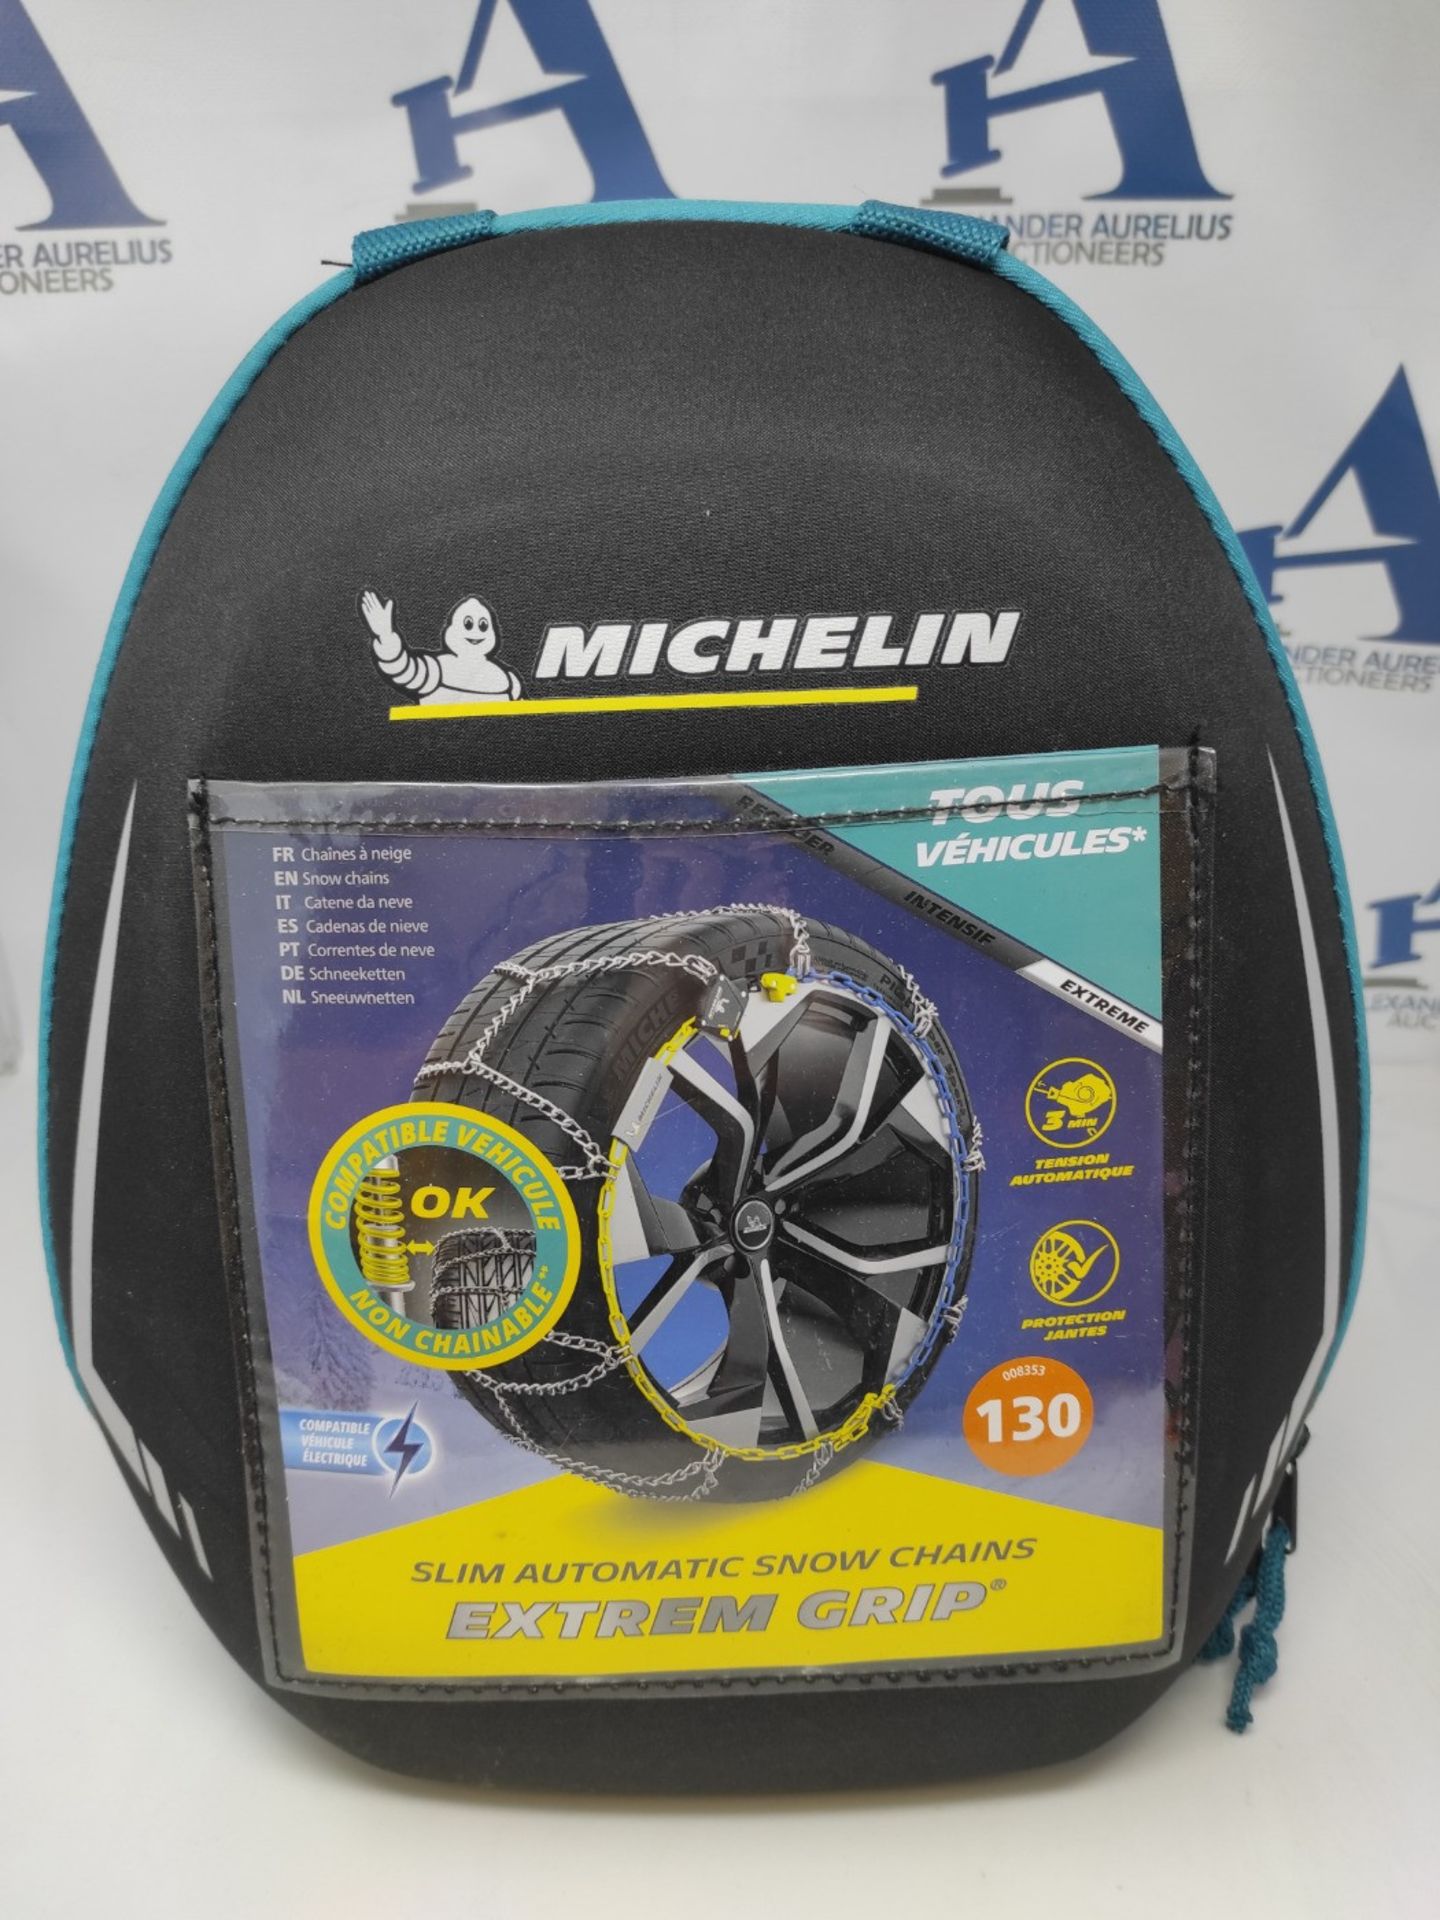 RRP £189.00 MICHELIN EXTREM GRIP, Metal snow chains 7 mm, Automatic tension, No. 130 - Image 2 of 3